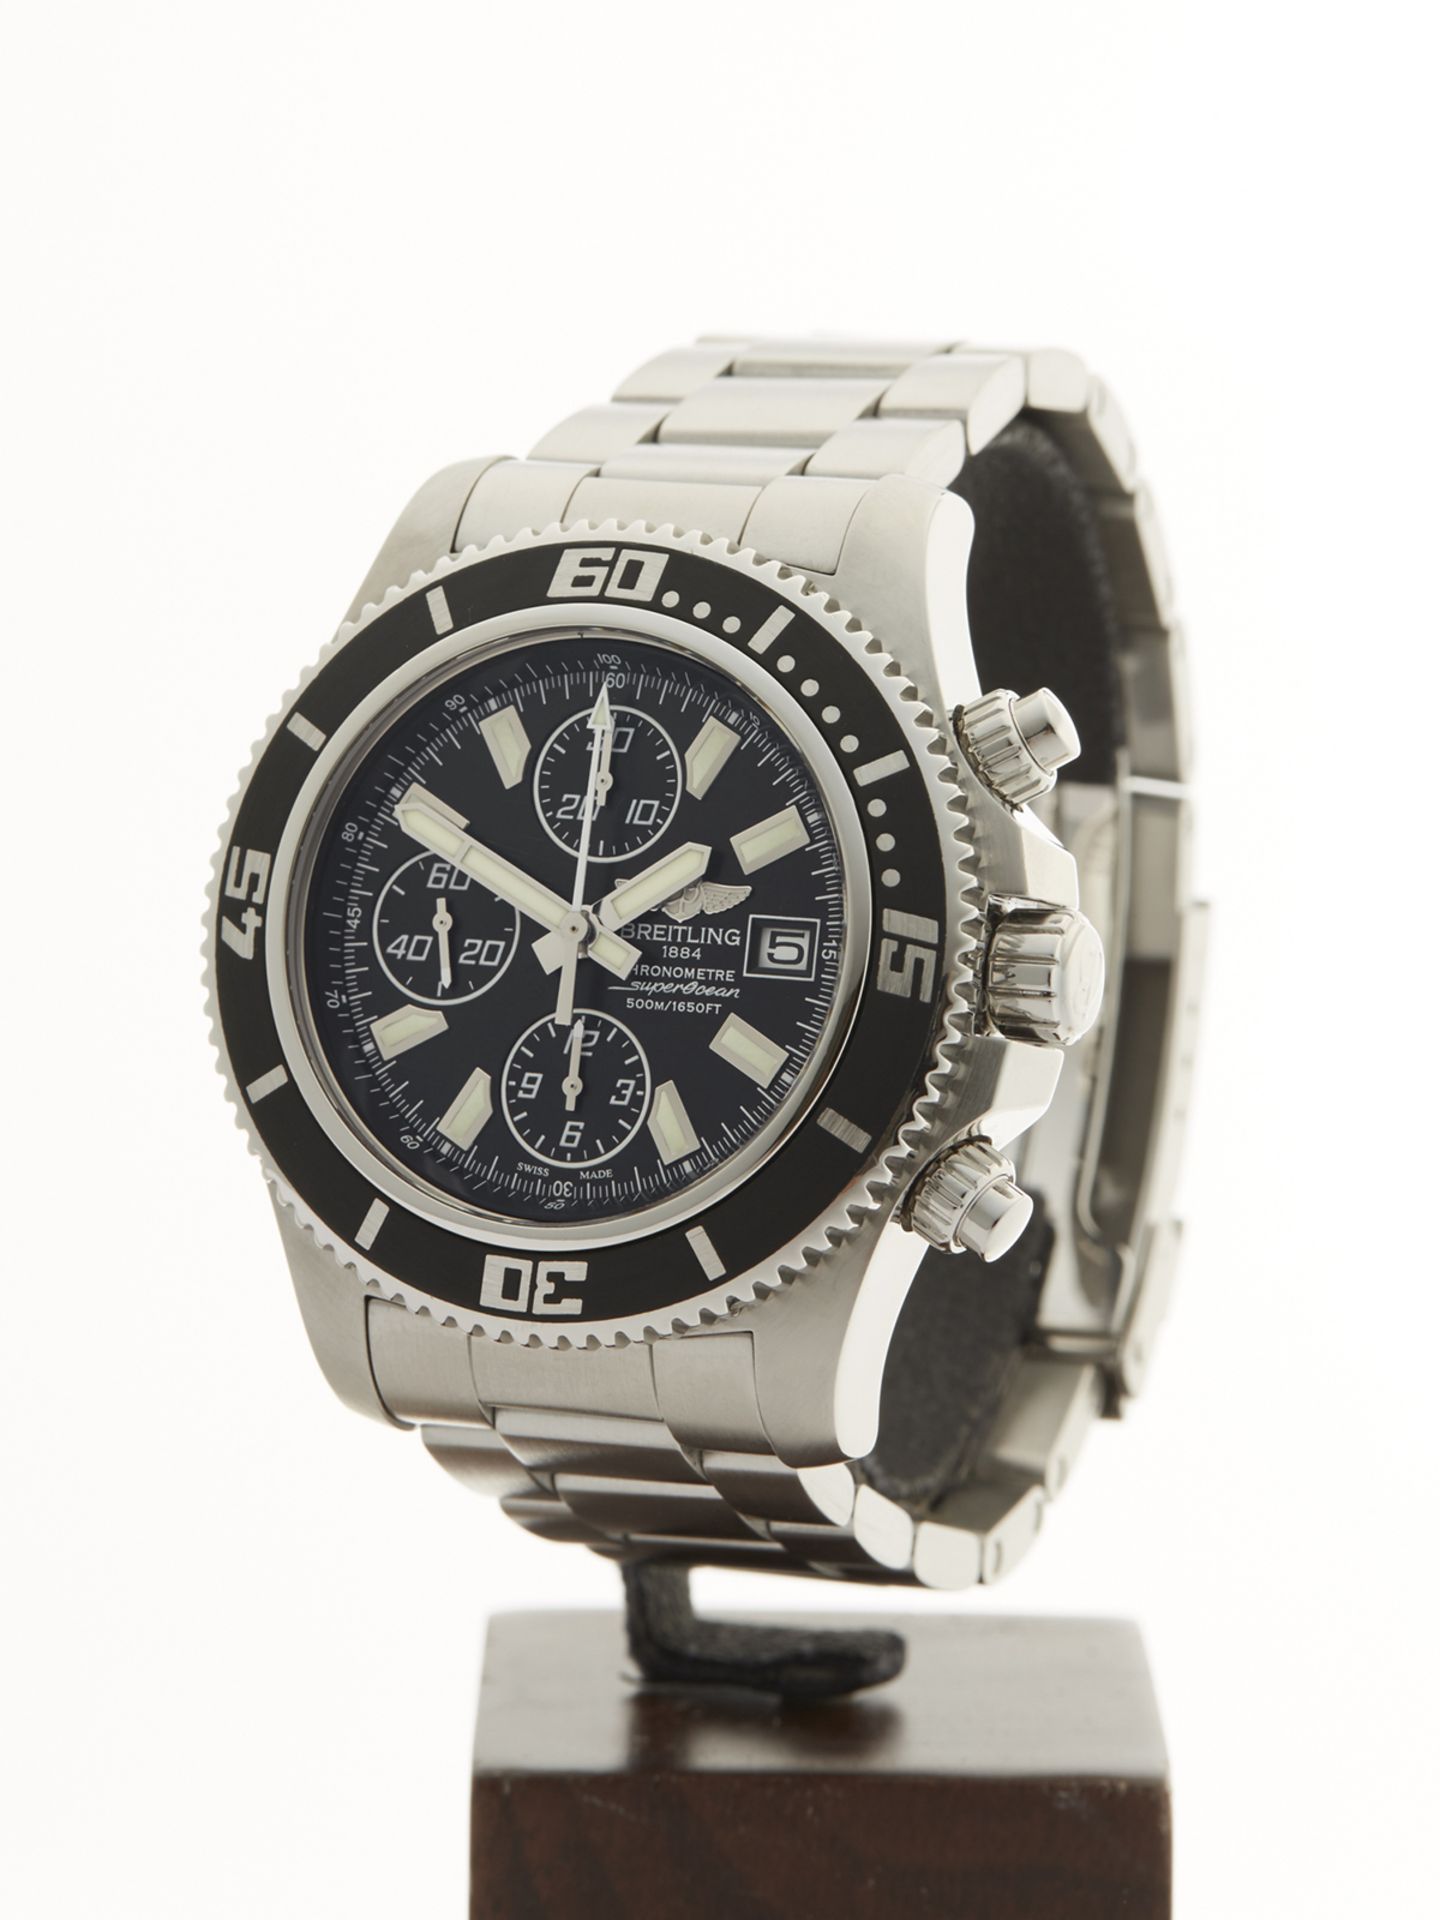 Breitling Superocean II Chronograph 43mm Stainless Steel A1334102 - Image 2 of 9